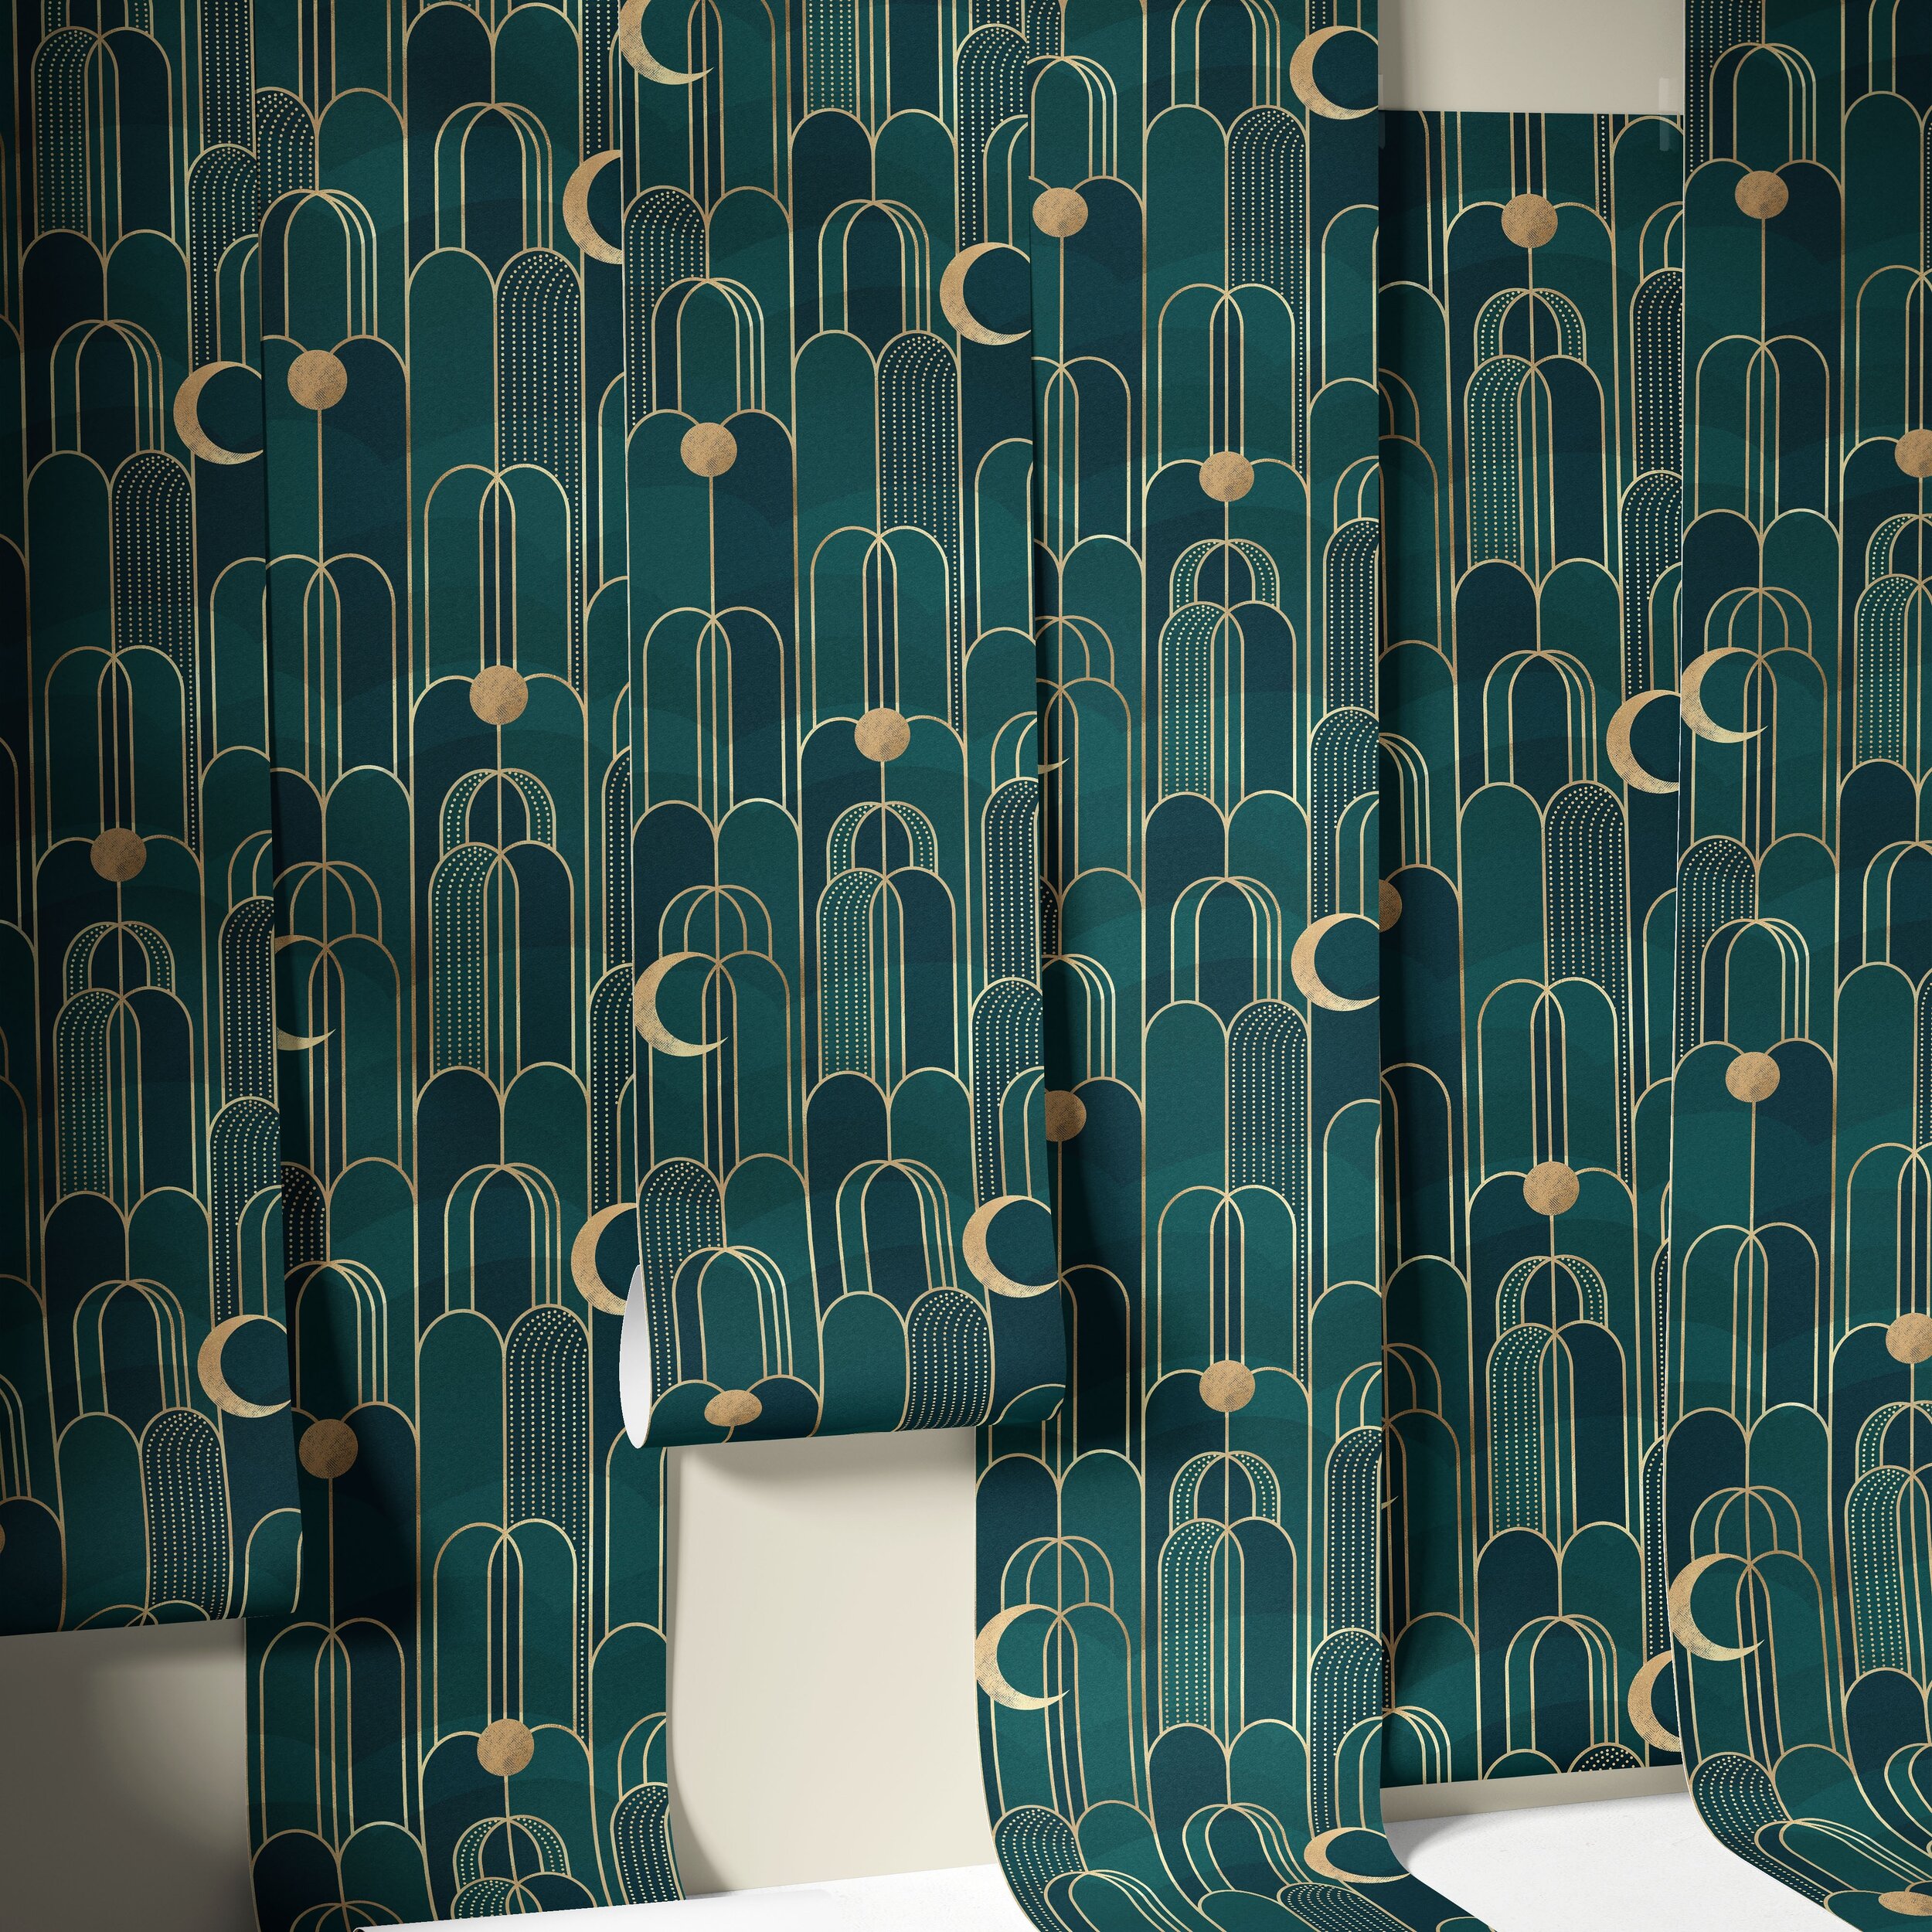 Wallpaper Wednesday! A little luxe, a little moody and a little Gatsby drama can be found in my Art Deco inspired Moon and Waterfall in Jade Green. I want a Speakeasy bar in my basement! 🥂 🌙 🍾 🌖 ✨ 💎 

Wallpapers thirty percent off until April 7t